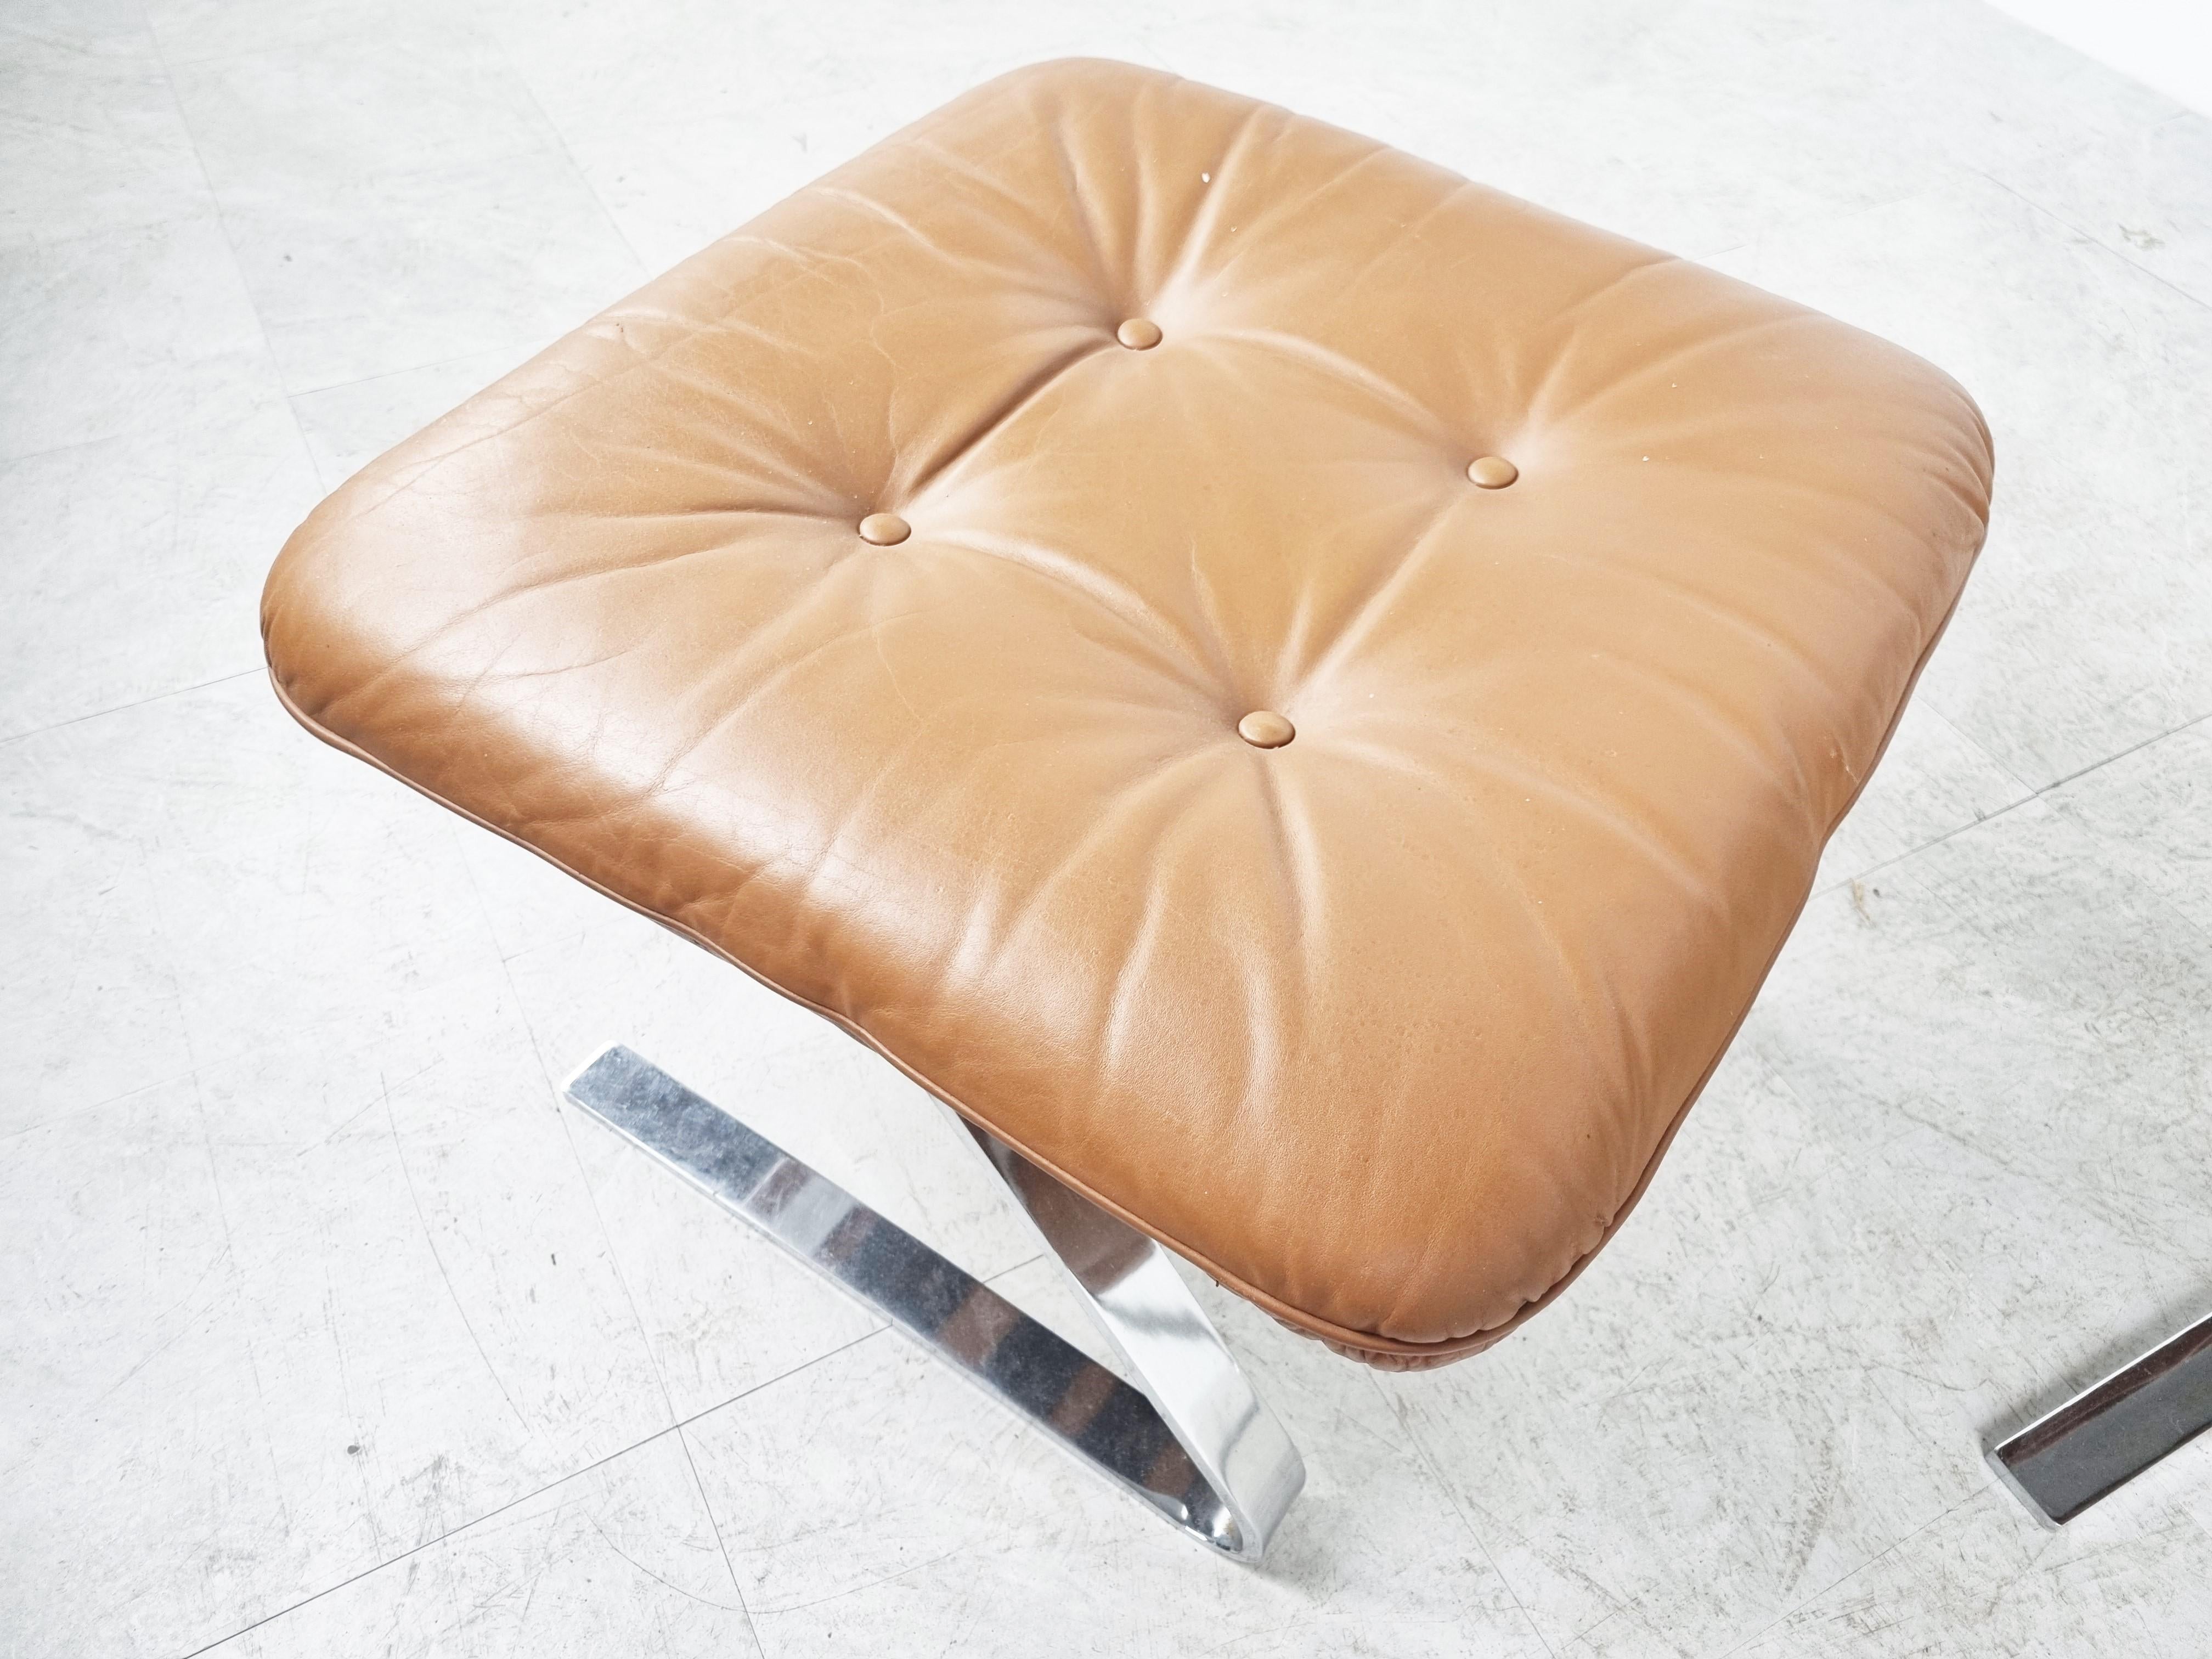 Leather armchiar with footstool by Reinhold Adolf for Cor.

Steel chromed frames with tan leather upholstery.

Good condition, renewed seat straps.

1970s - Germany

Height: 95cm/37.40